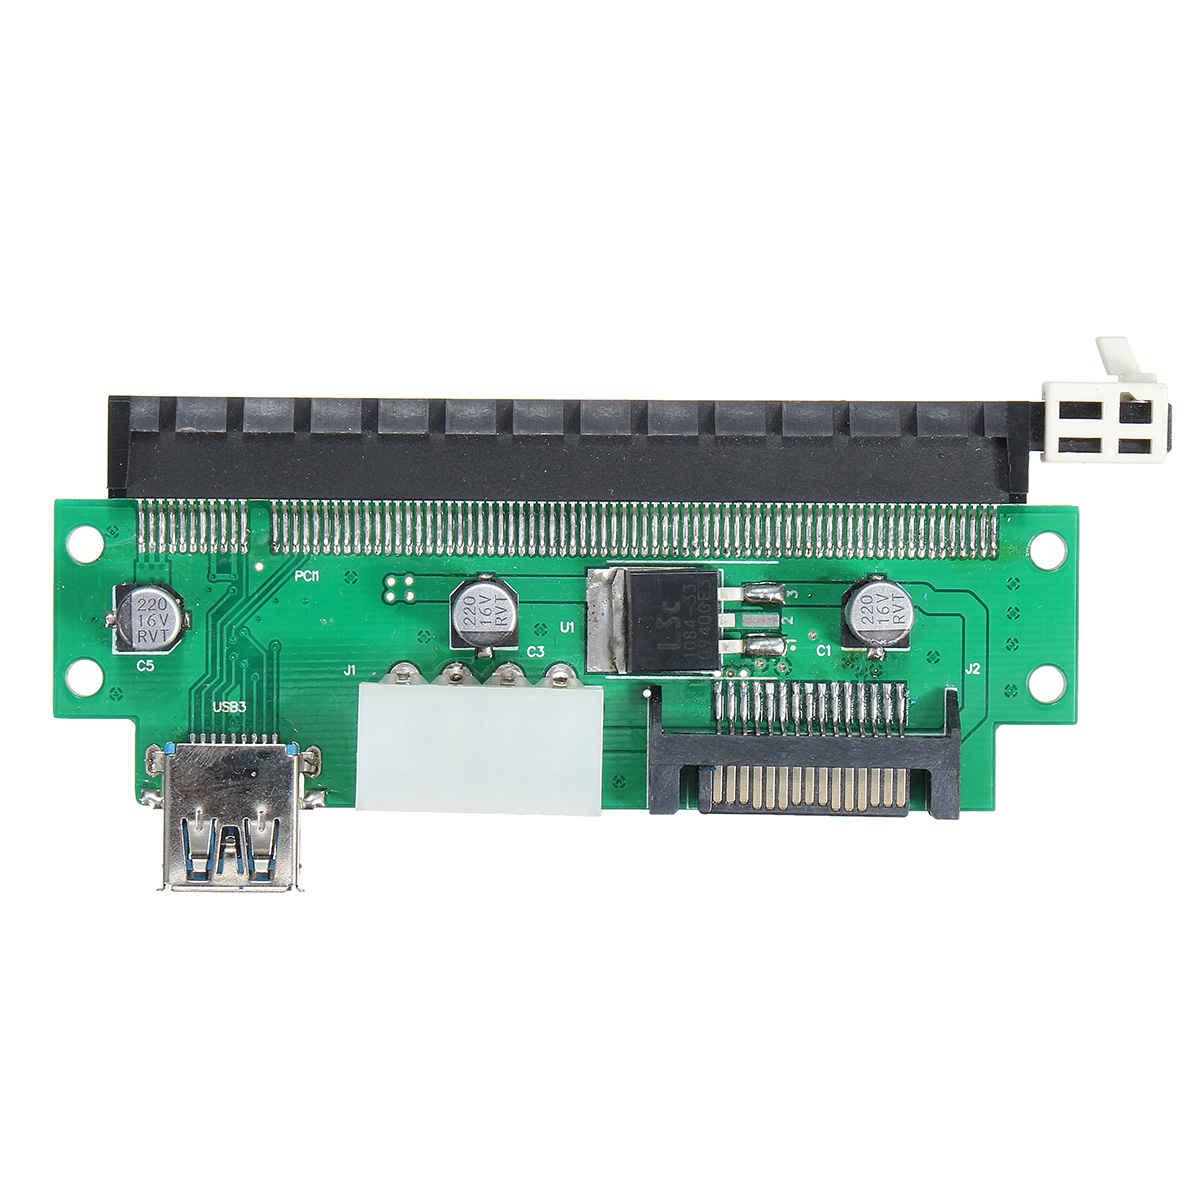 PCI-E-1X-to-16X-Extended-Card-Adapter-USB-30-Extender-Mining-Rig-Graphics-Card-Extension-Adapter-wit-1941181-6